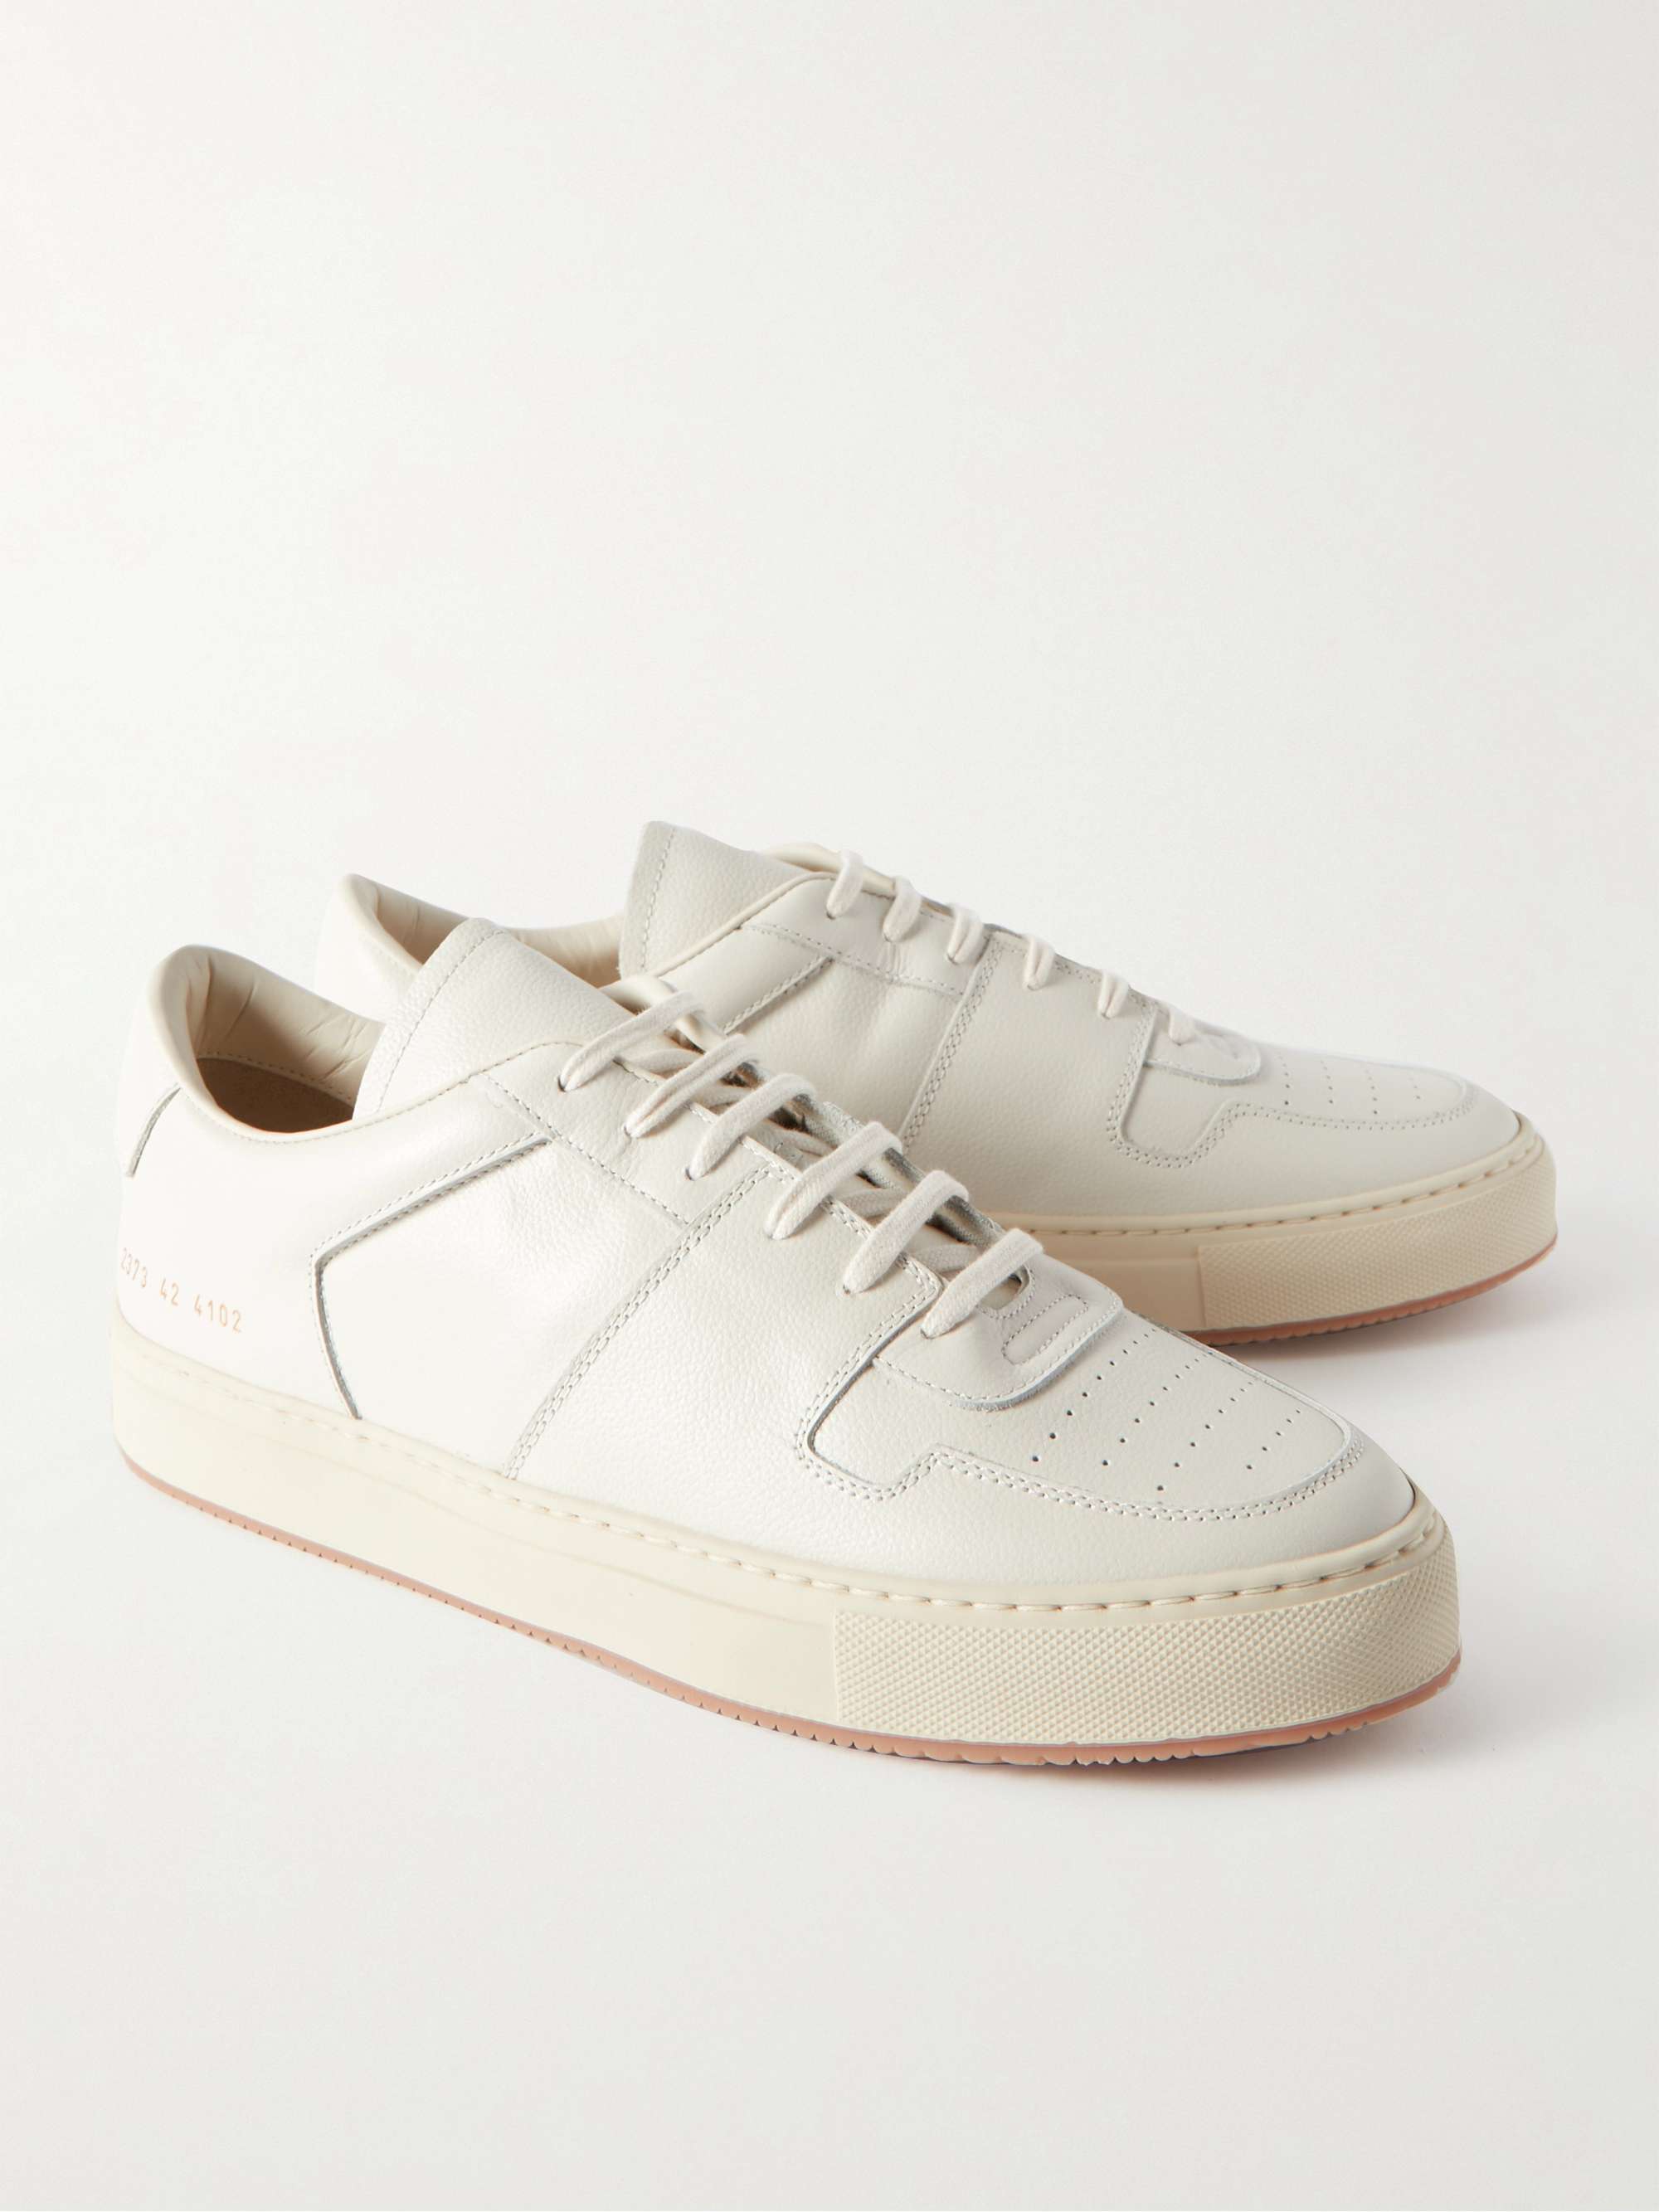 COMMON PROJECTS Decades Leather Sneakers